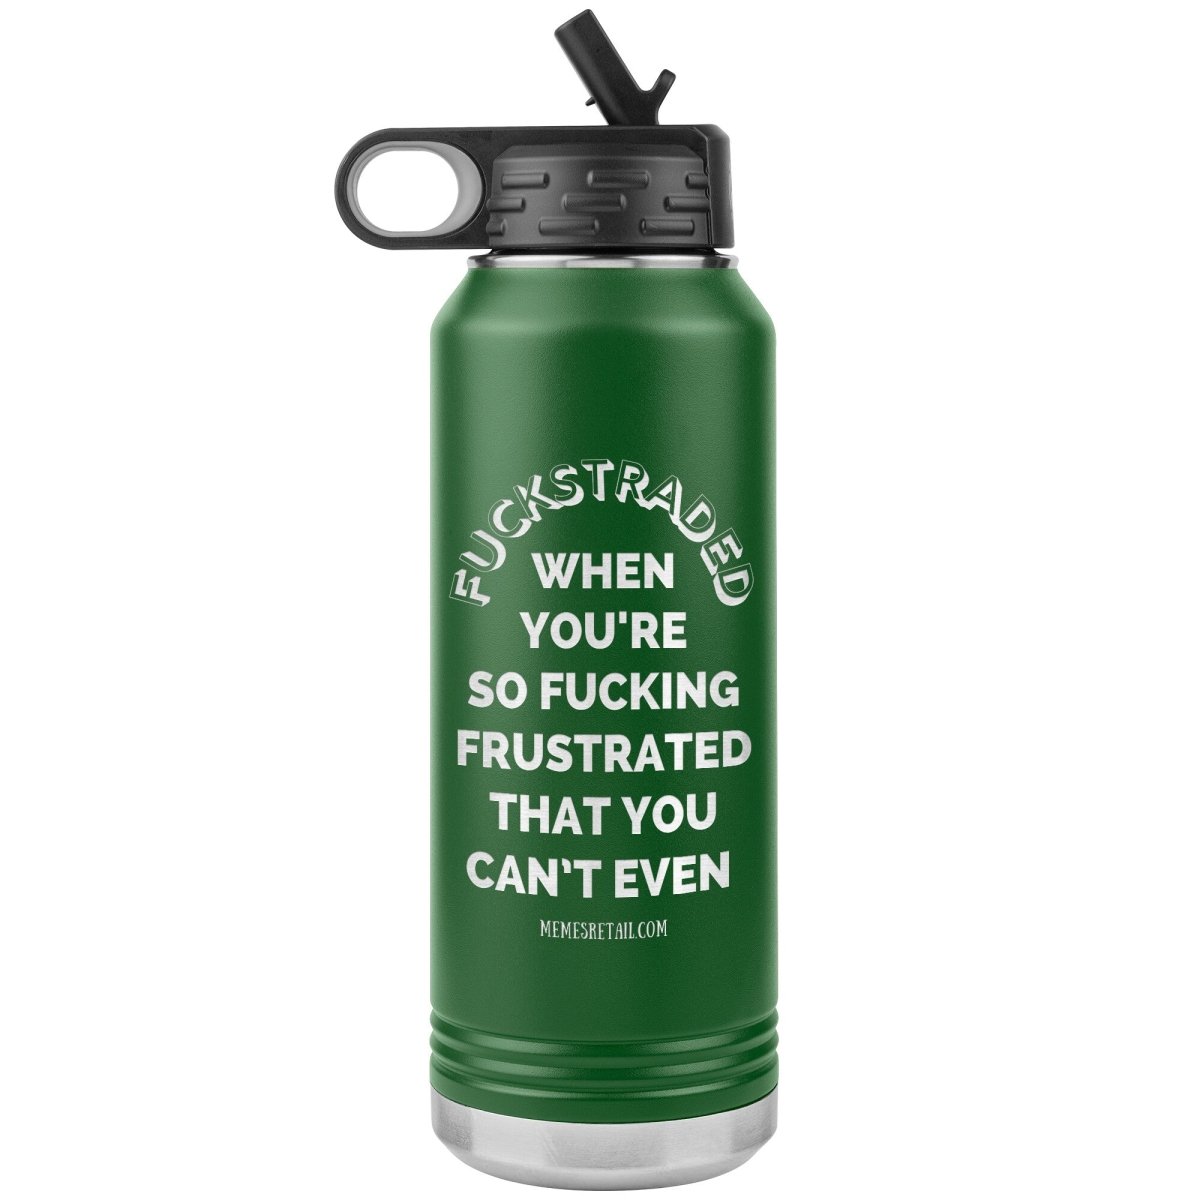 Fuckstraded, When You're So Fucking Frustrated That You Can’t Even - 32oz Water Tumblers, Green - MemesRetail.com